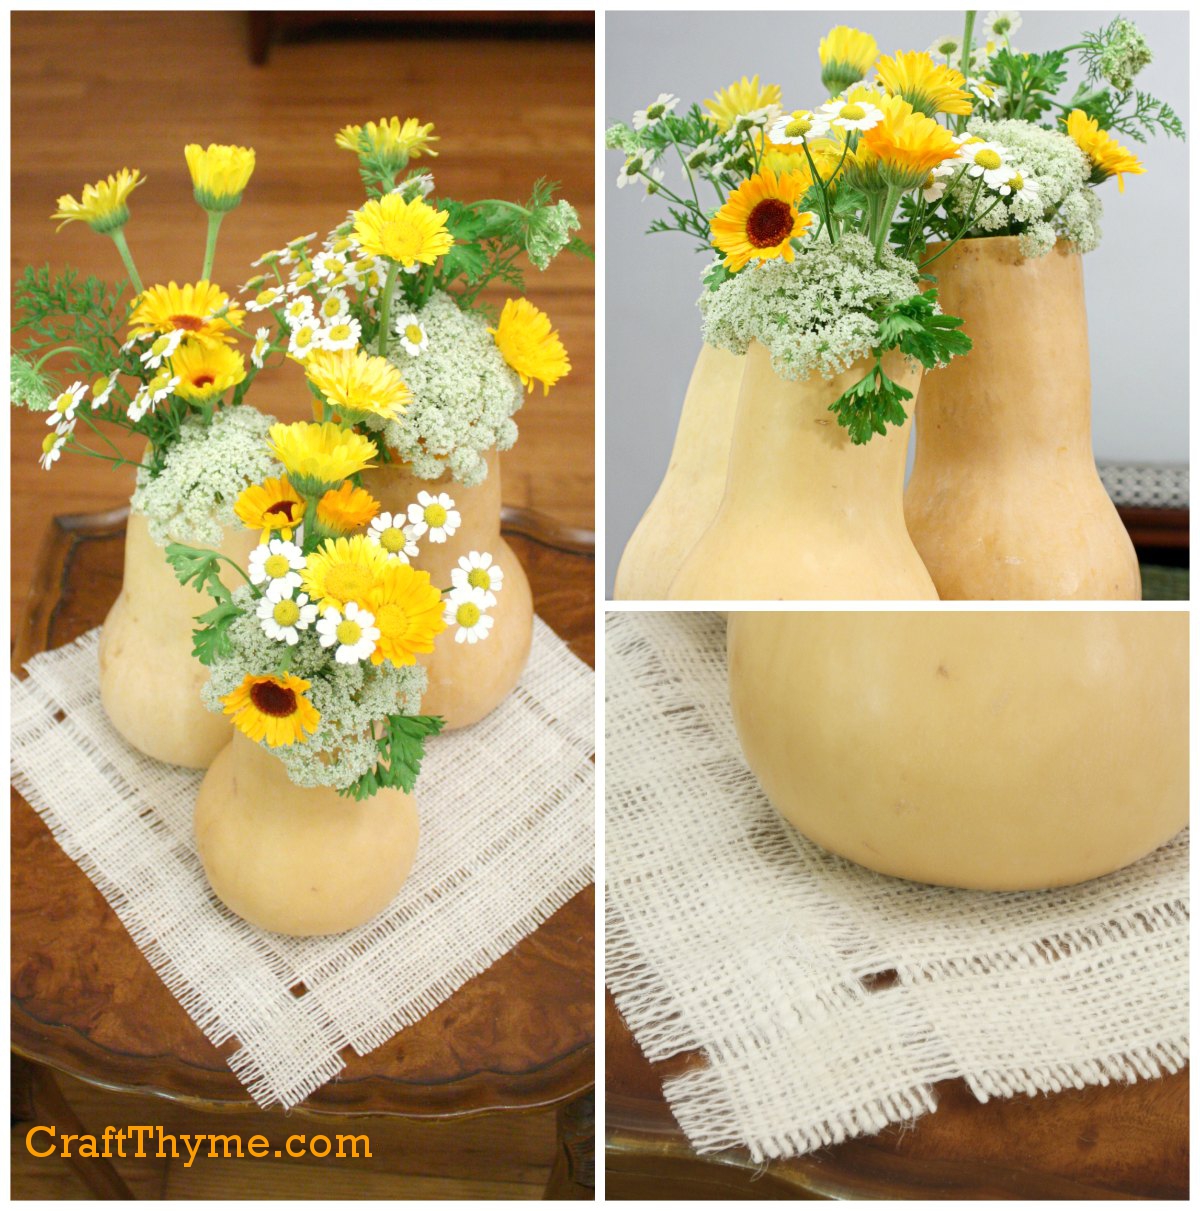 Autumn decorations made from butternut squash